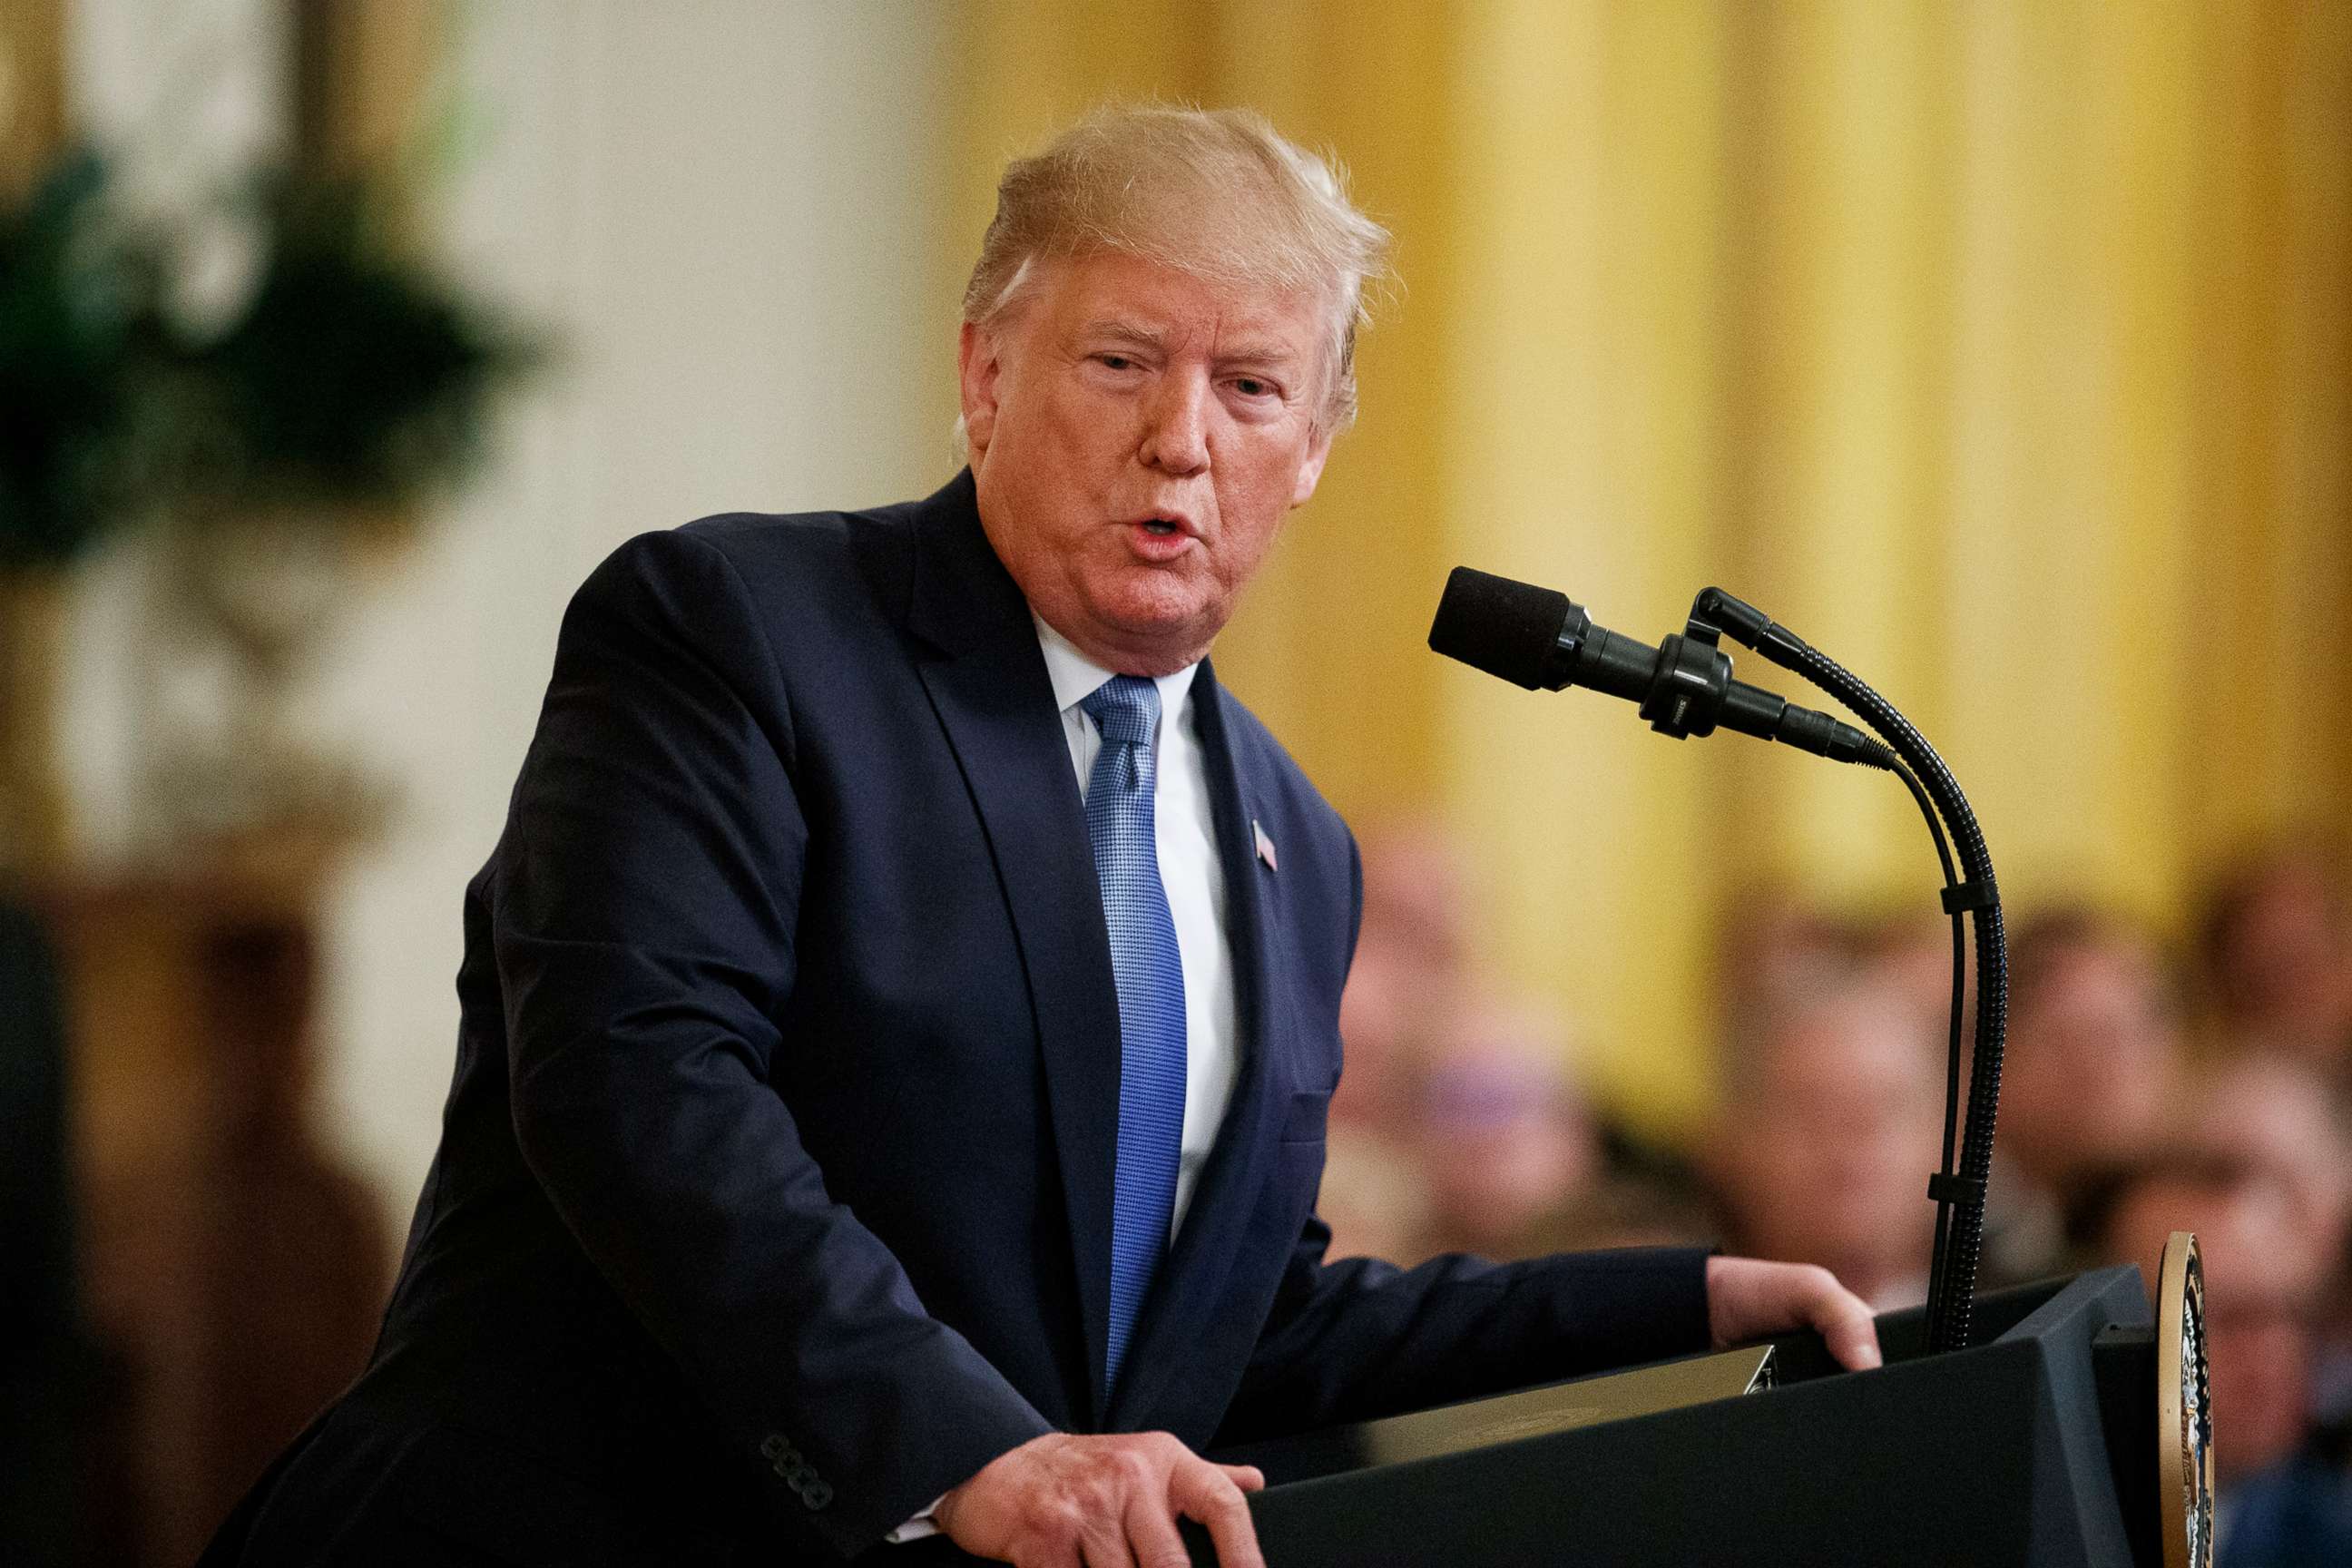 PHOTO: President Donald Trump speaks during an event on the environment in the East Room of the White House, July 8, 2019, in Washington.